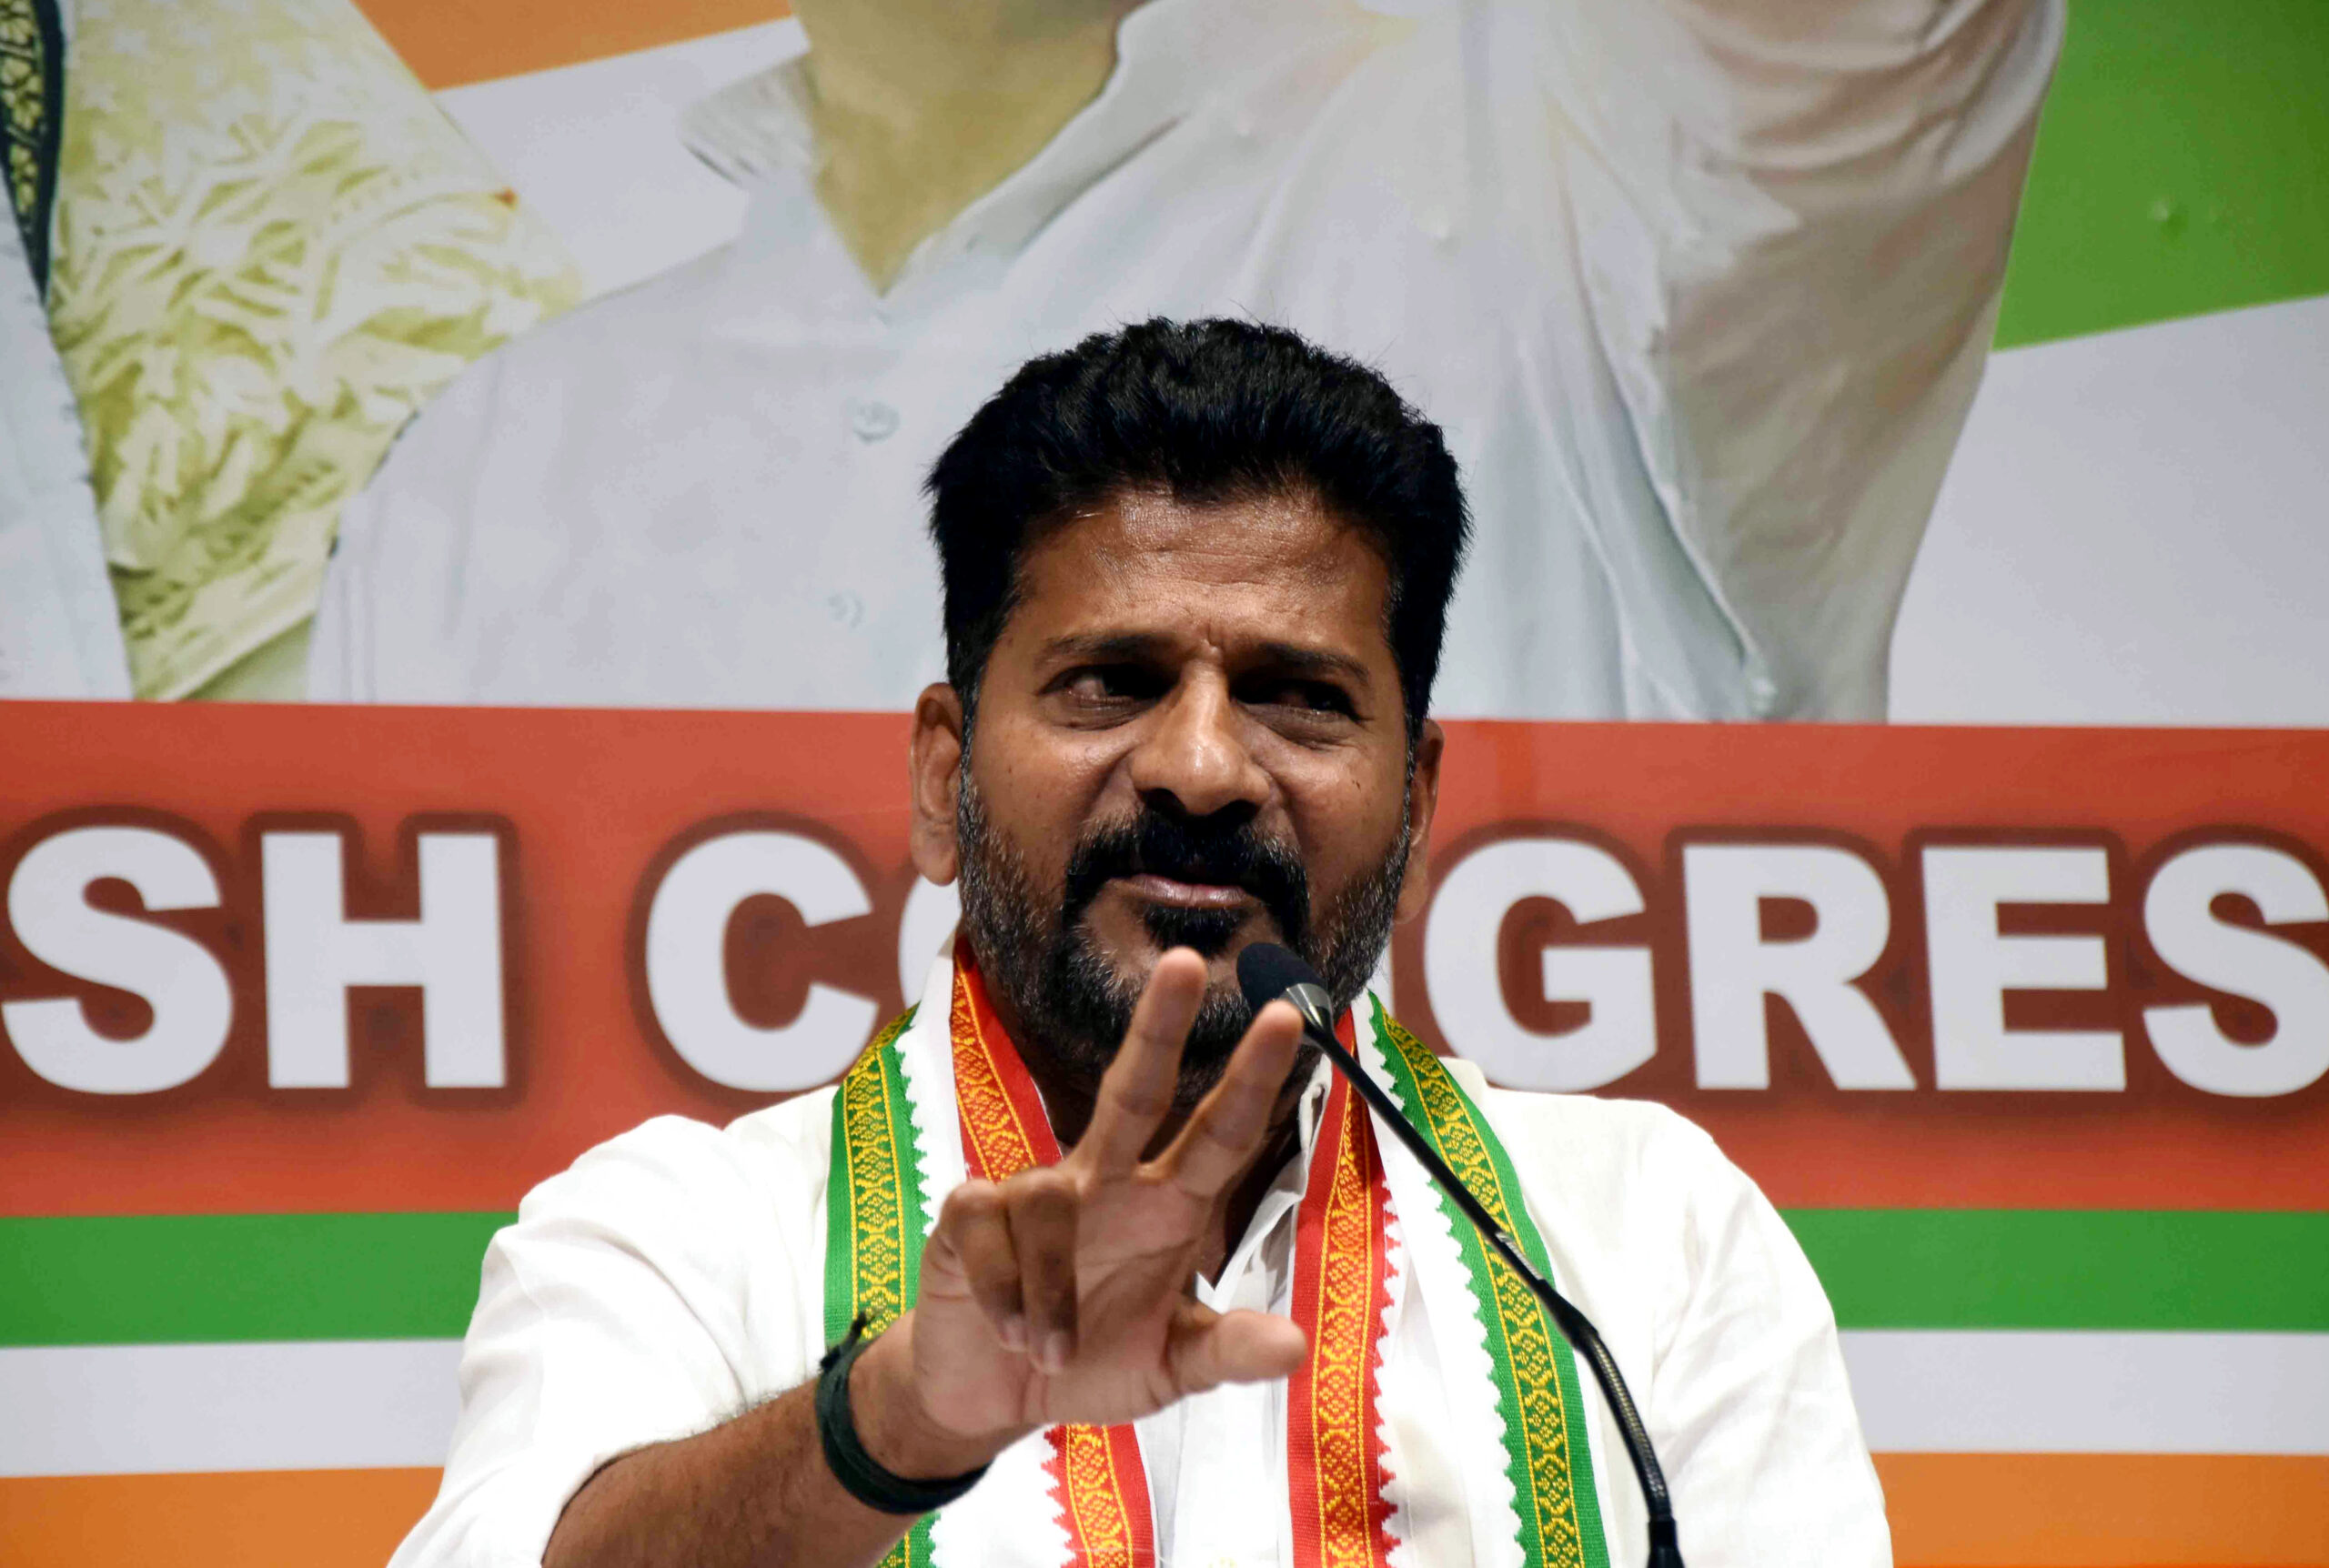 Calls for Revanth Reddy as Telangana CM Grow, Supporters Praise His Leadership for Congress’ Triumph’